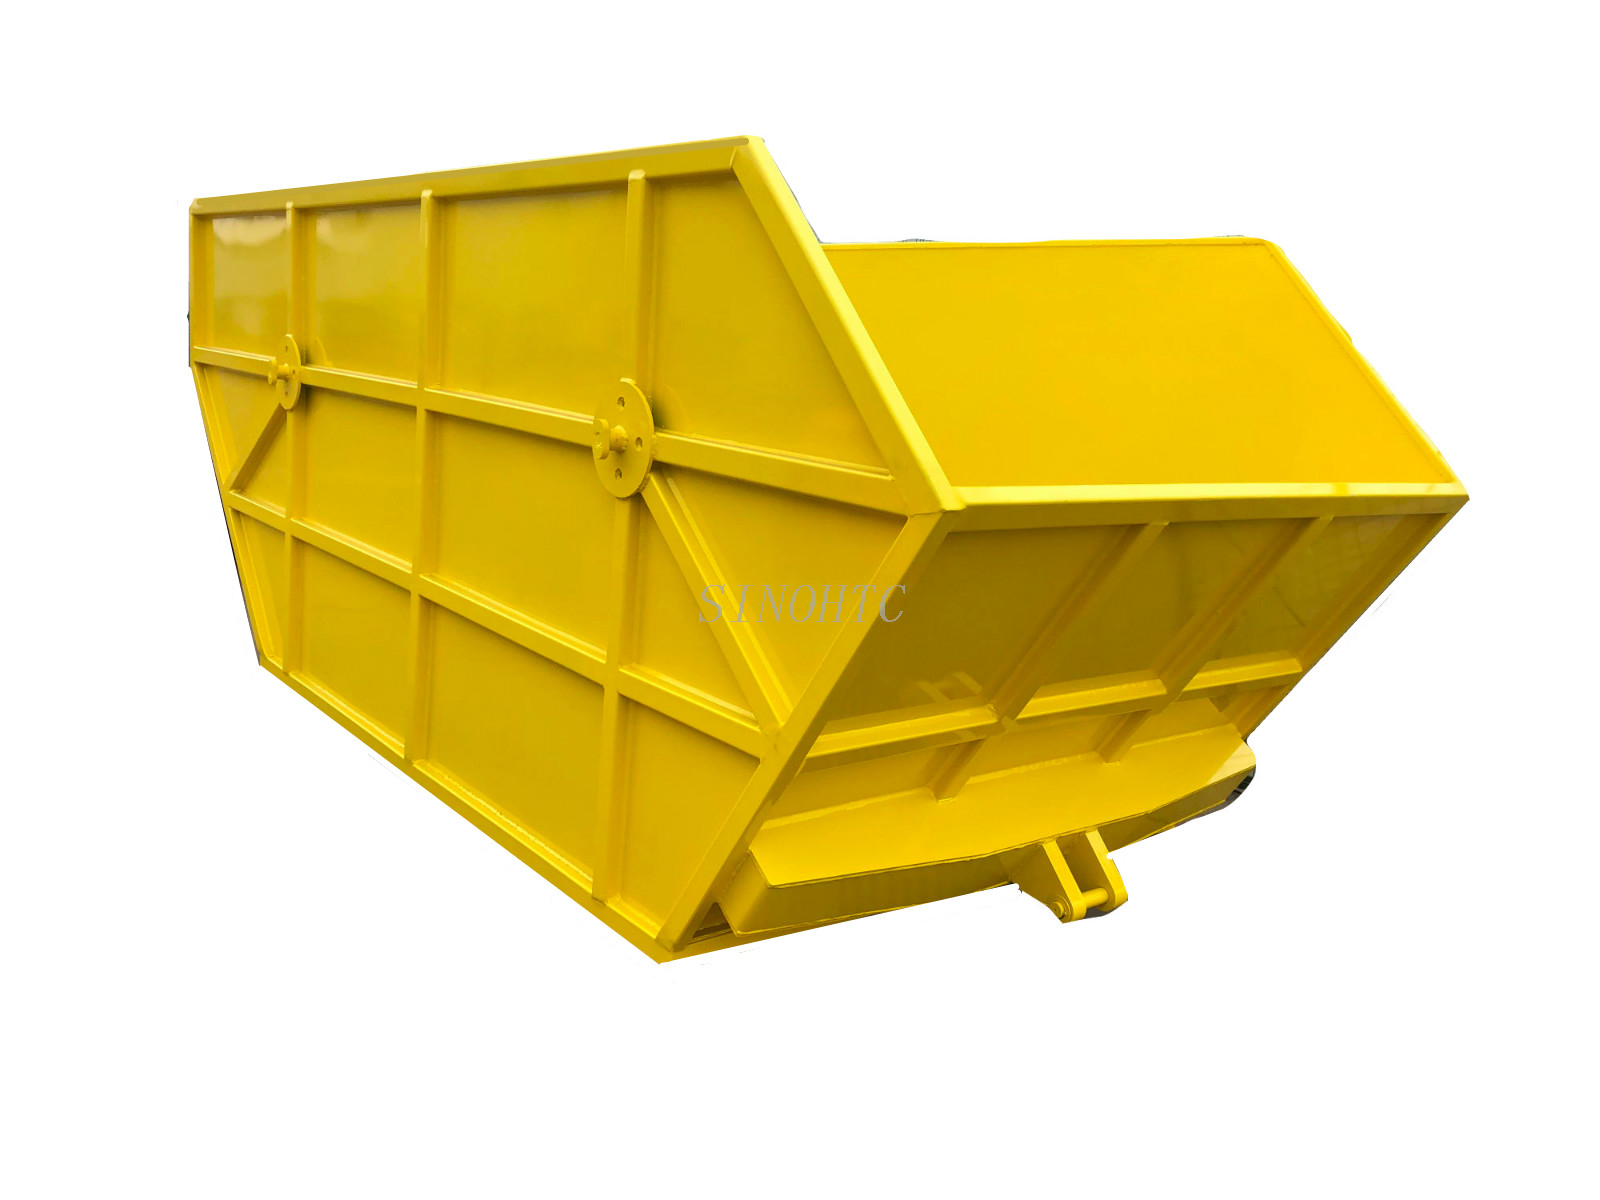 6-8 Tons Garbage Truck Using Skip Load Containers/ Skip Load Bins